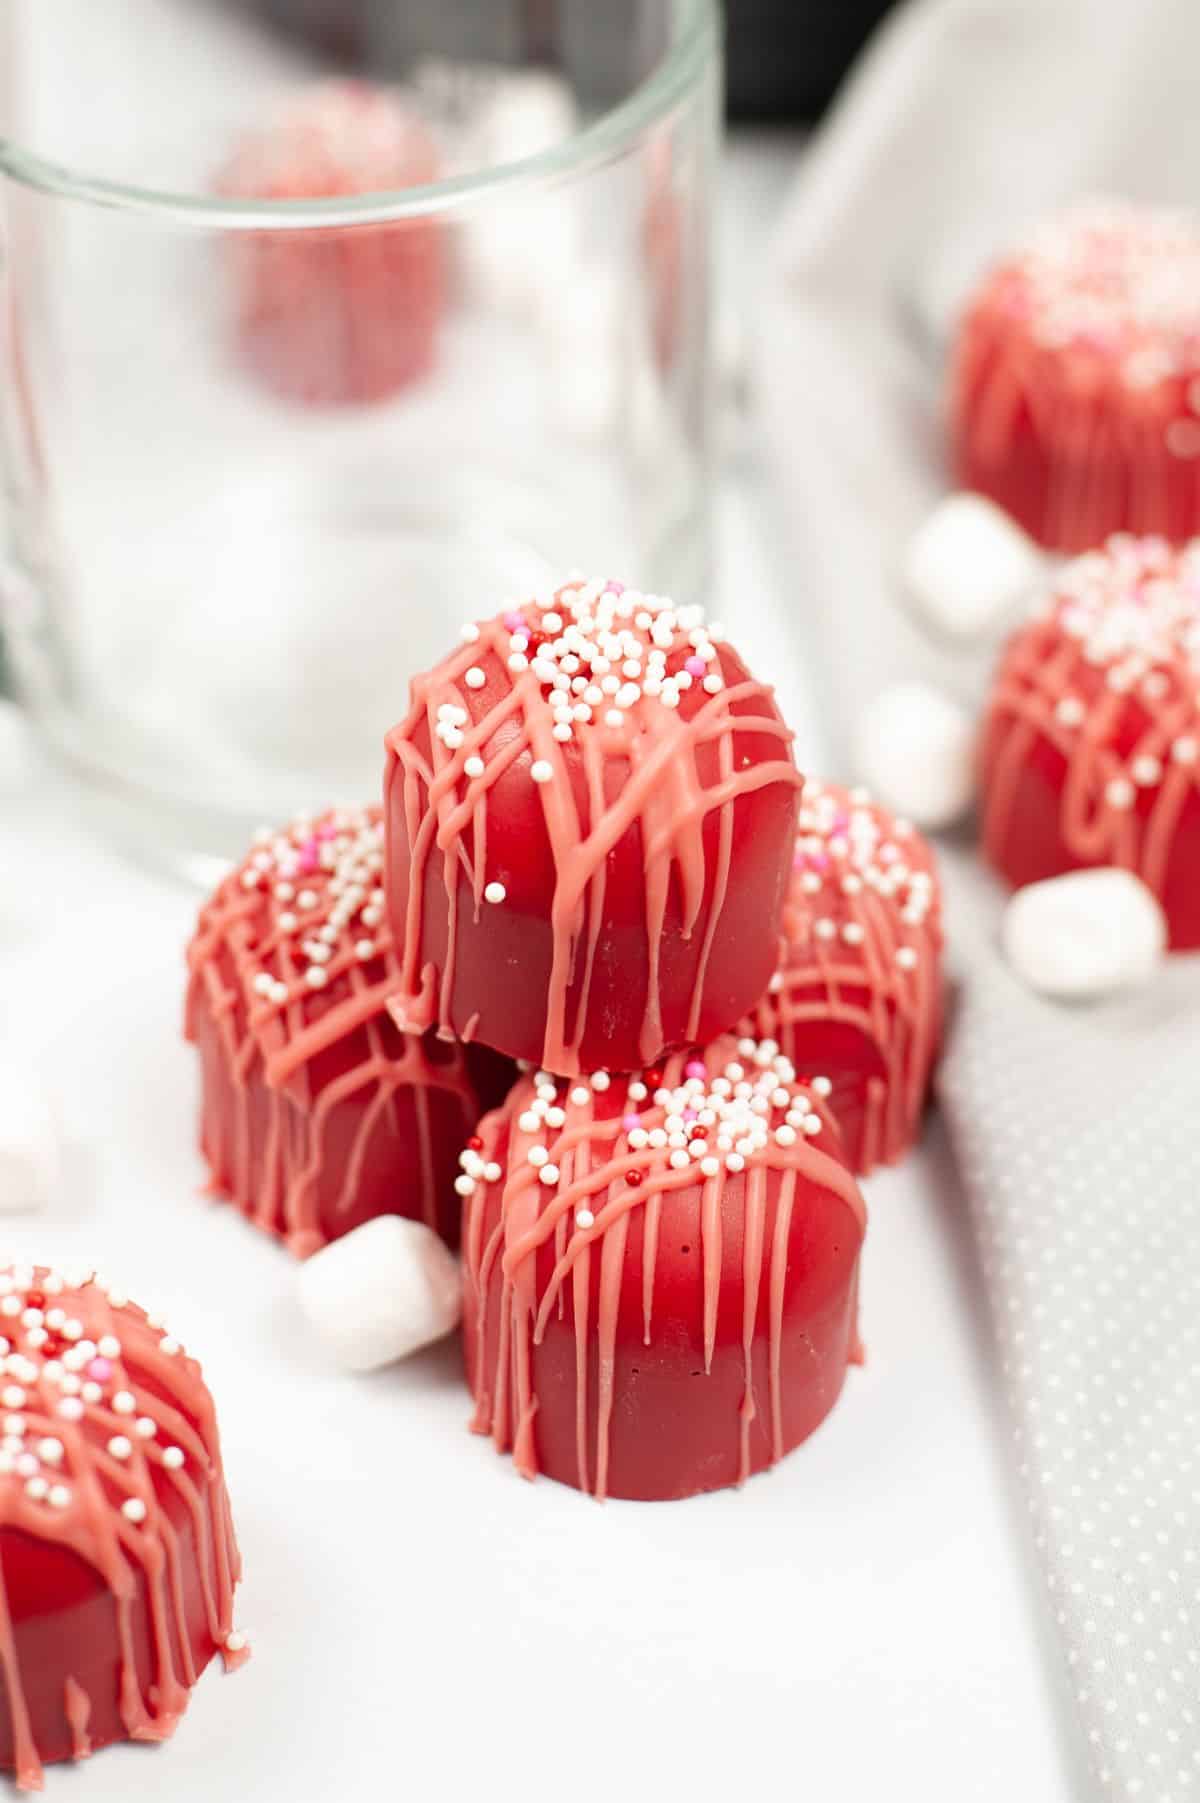 Valentine Cocoa Bombs with marshmallows and a mug on the side.